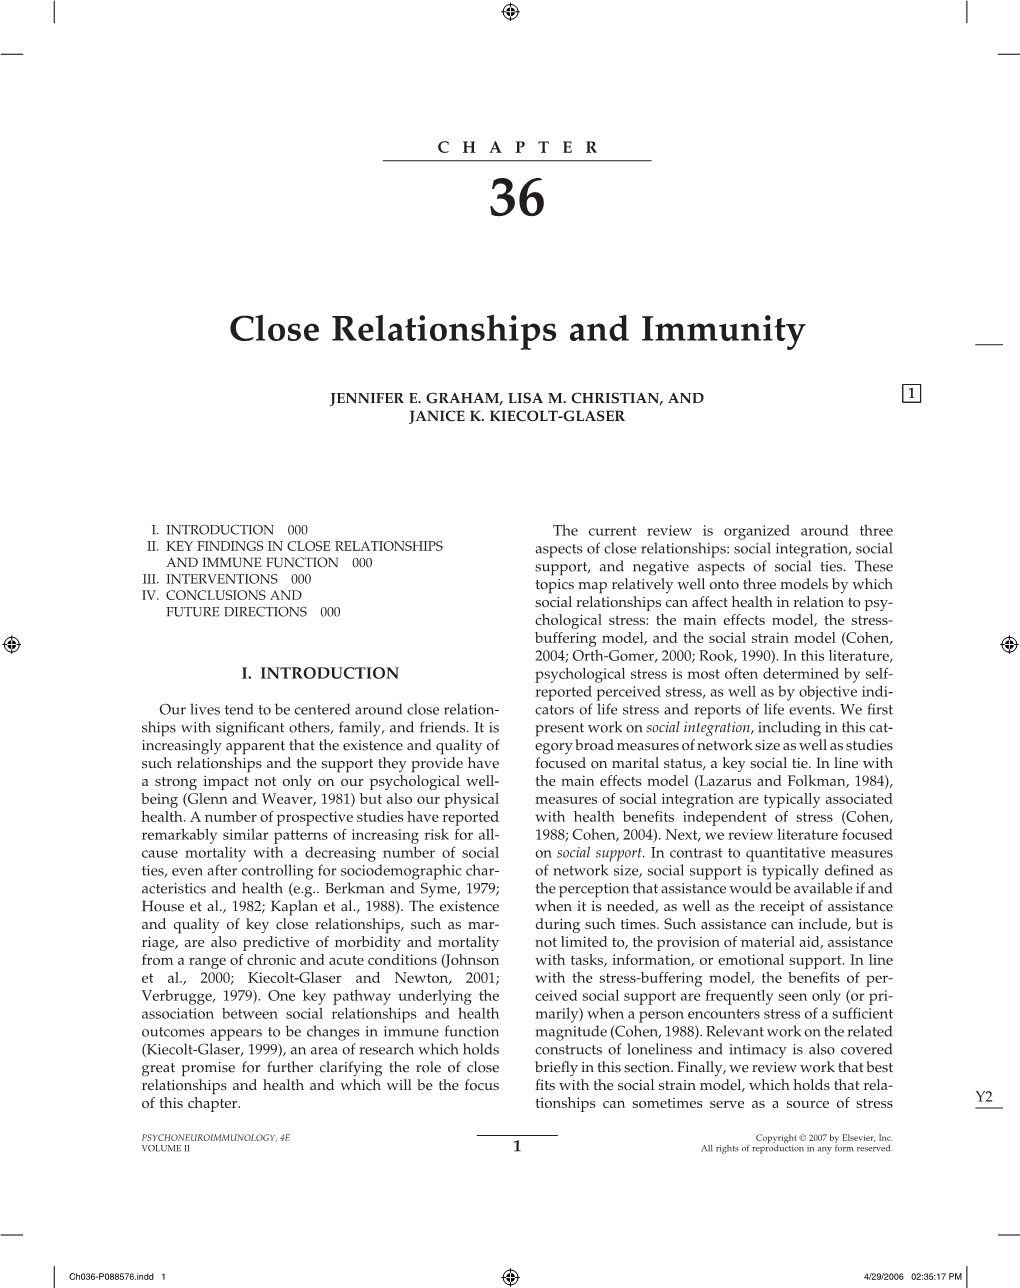 Close Relationships and Immunity